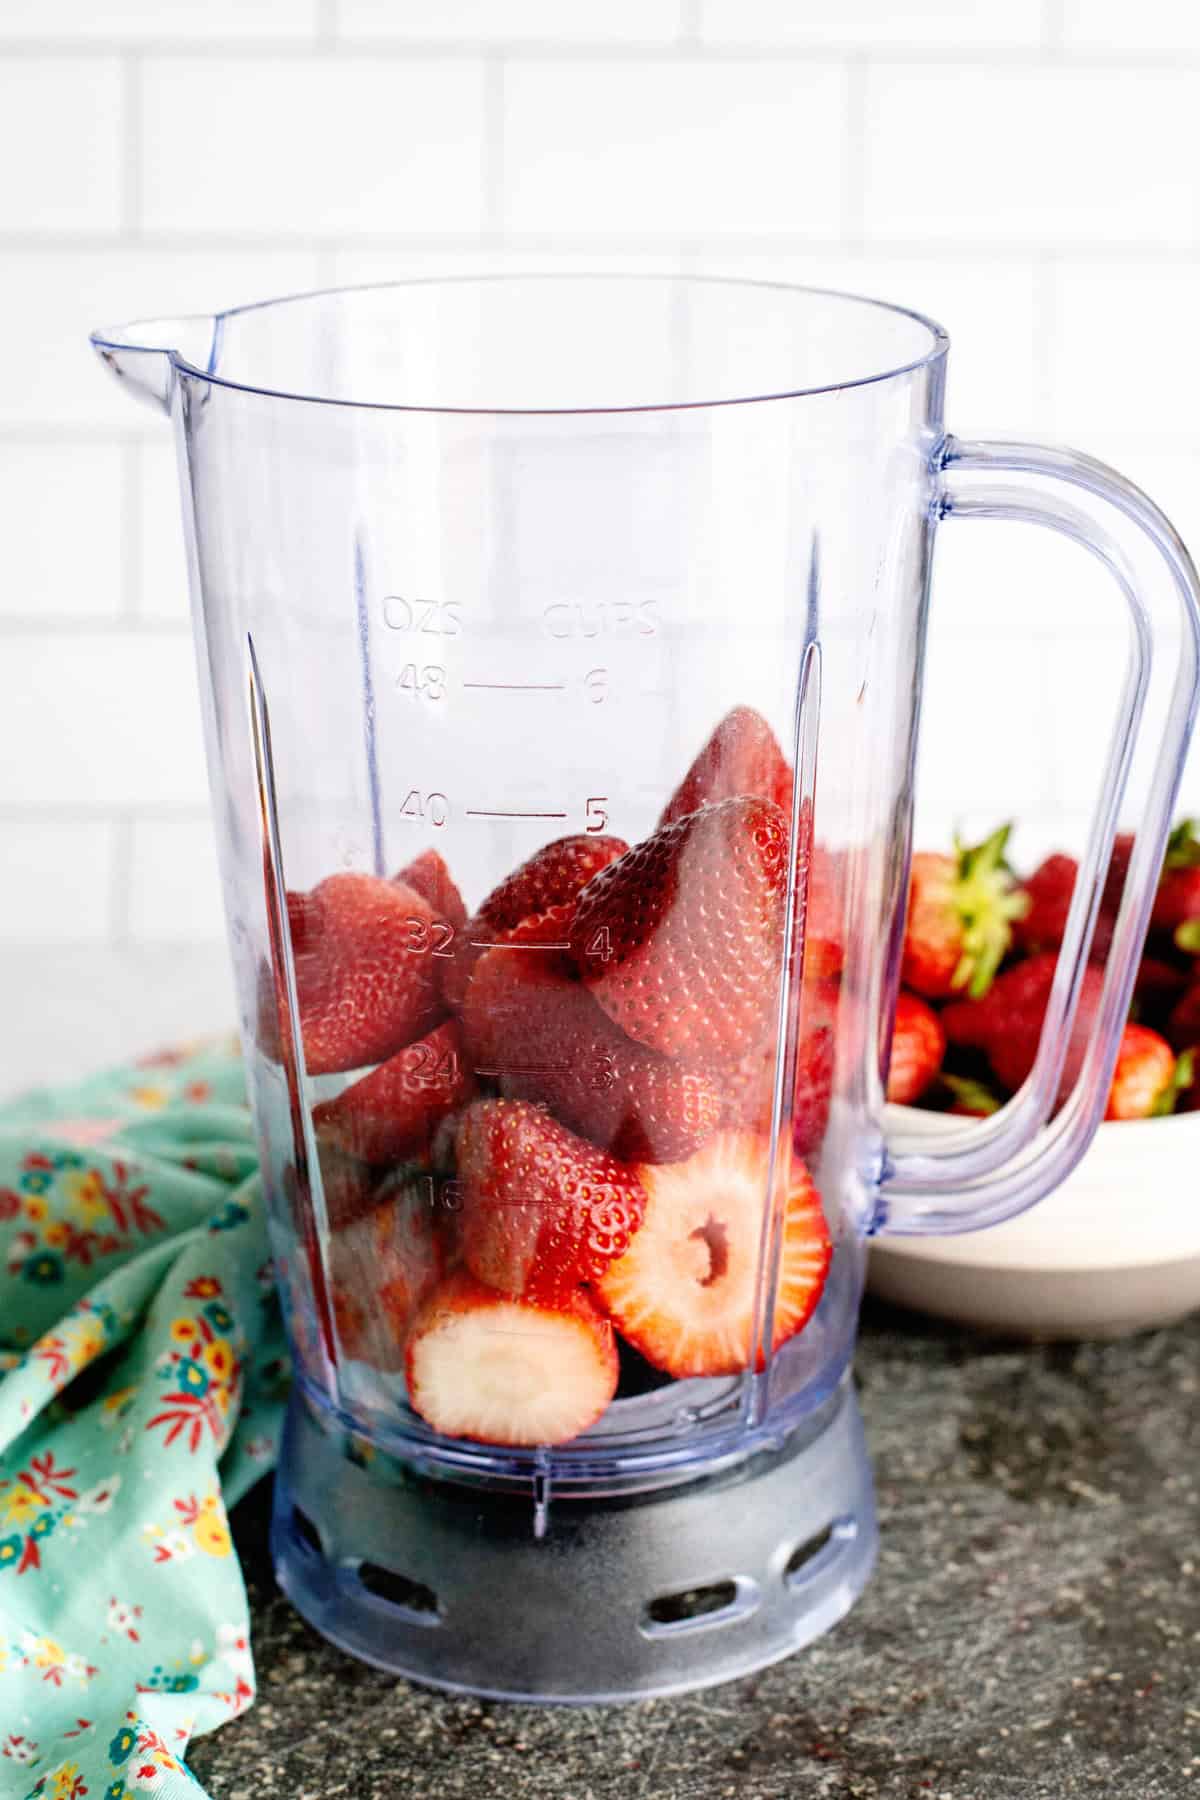 put strawberries into the blender